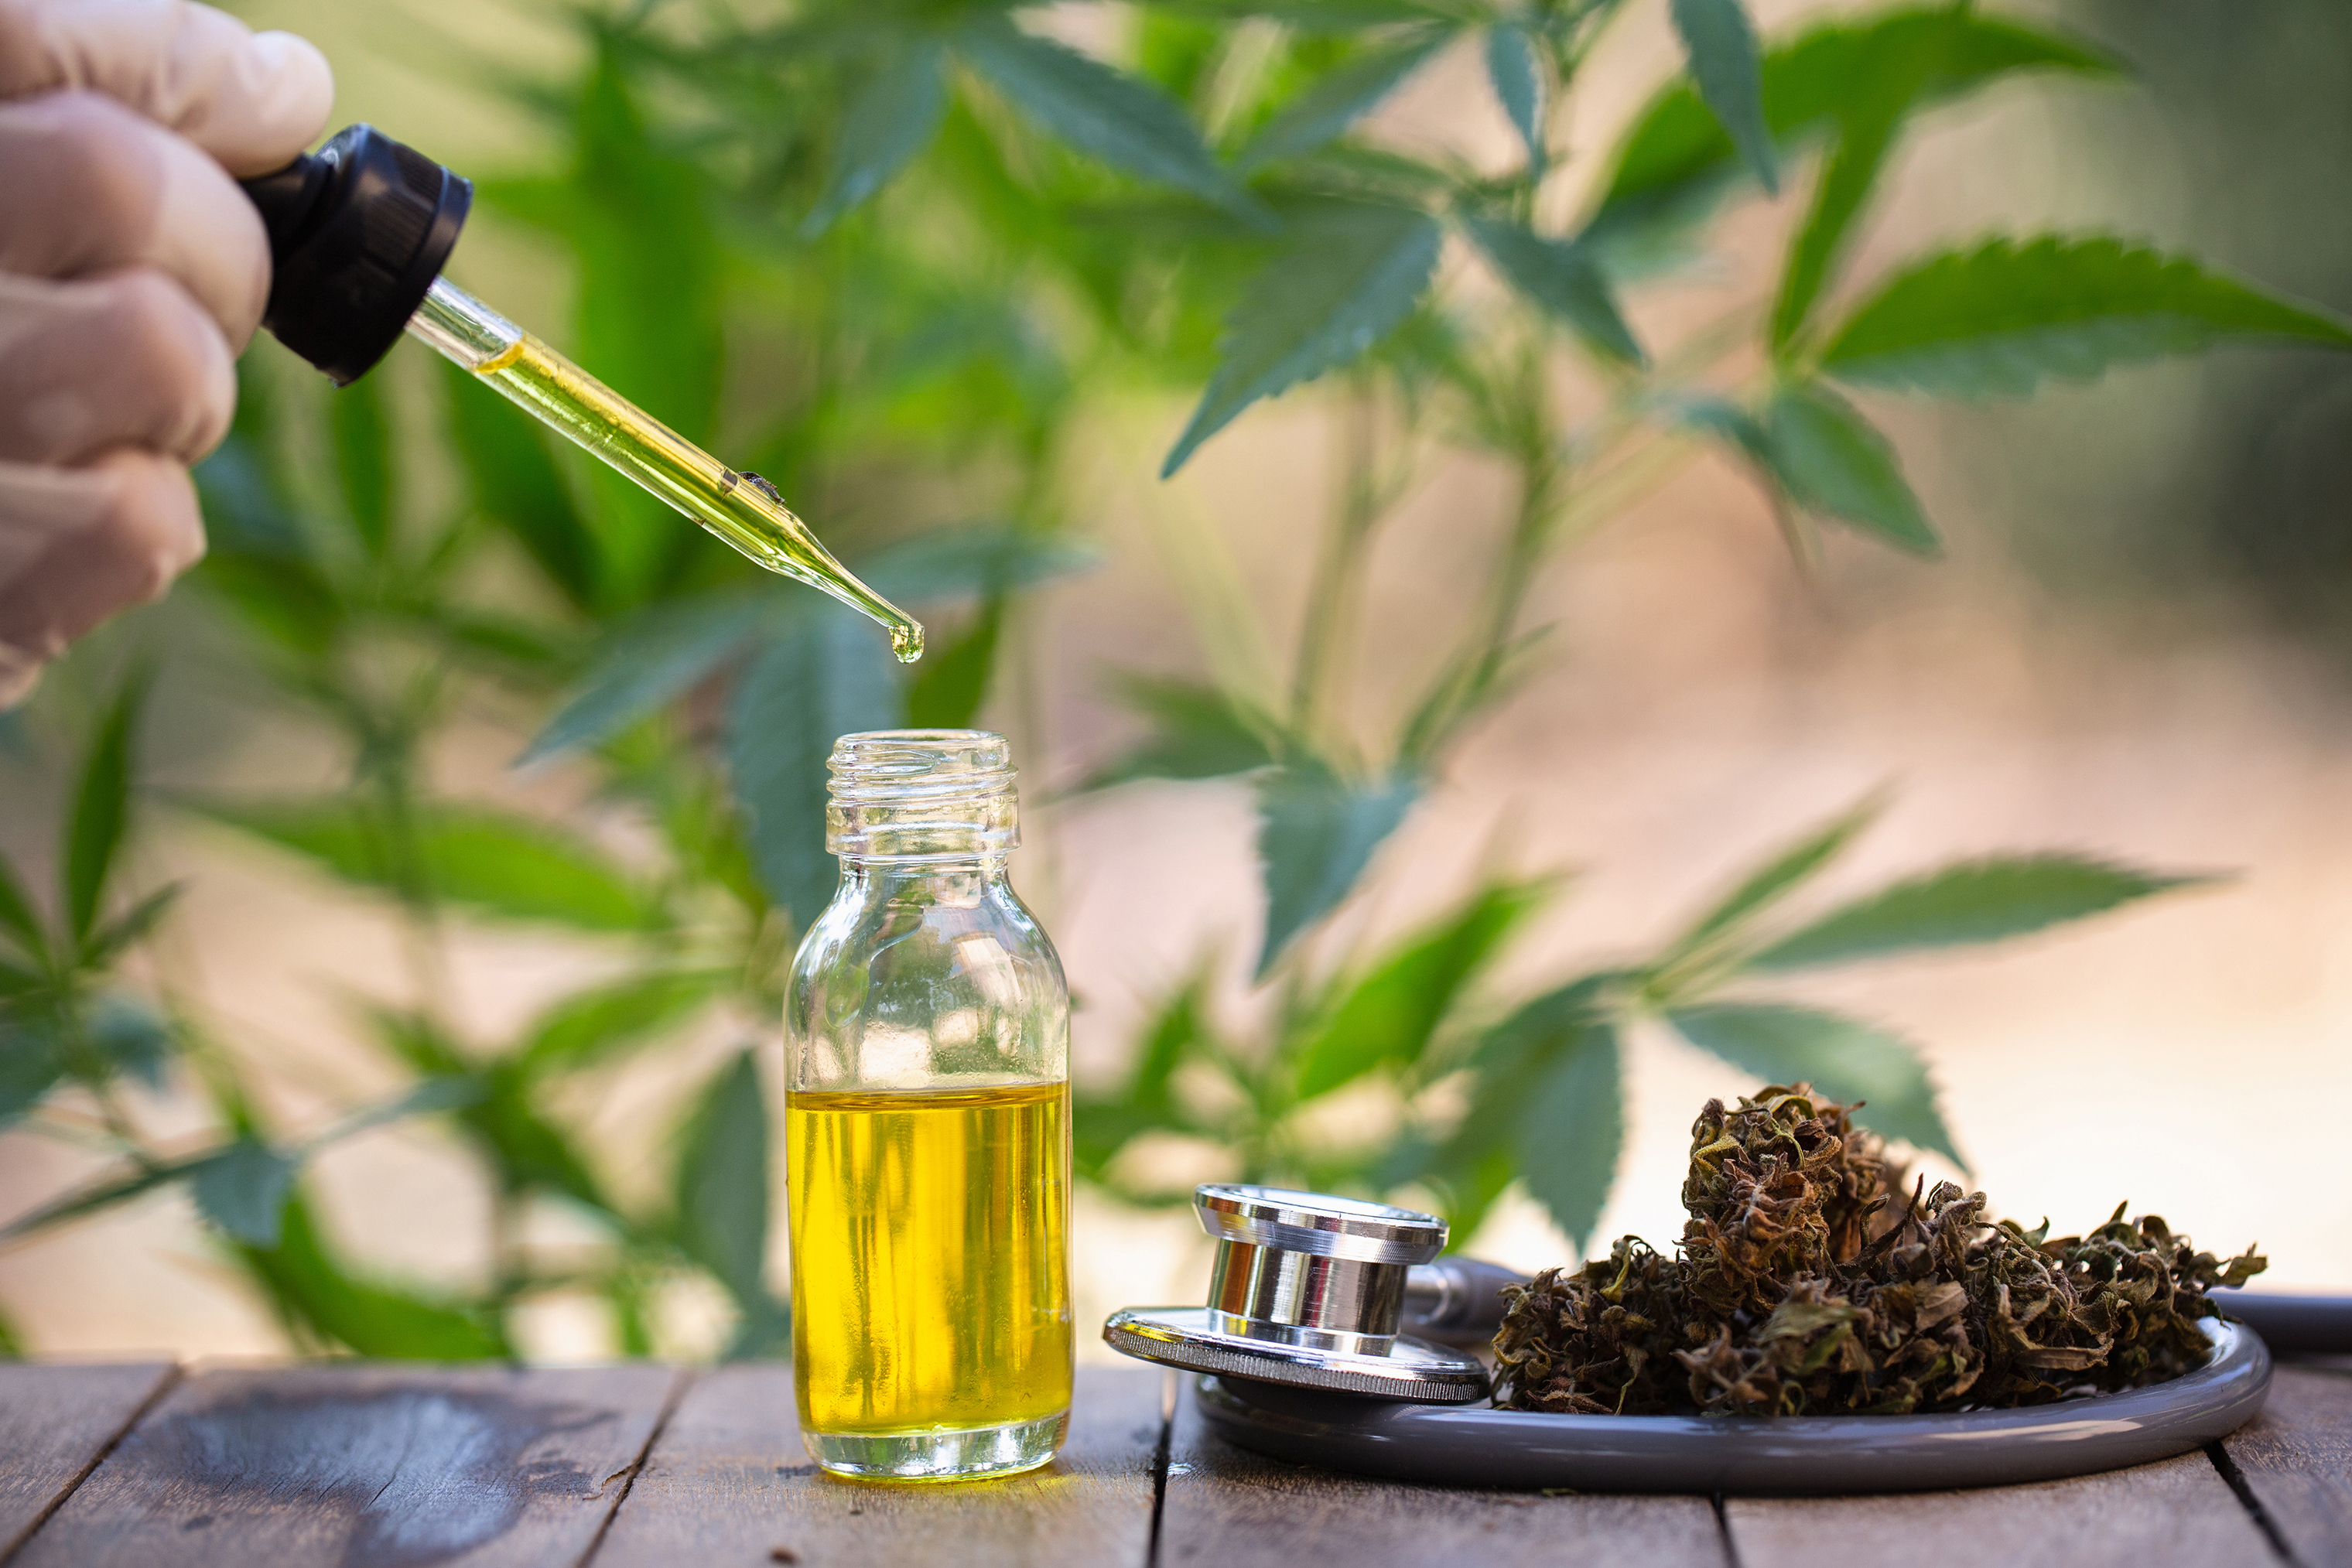 Www Where To Get Cbd Oil - Cbd|Oil|Cannabidiol|Products|View|Abstract|Effects|Hemp|Cannabis|Product|Thc|Pain|People|Health|Body|Plant|Cannabinoids|Medications|Oils|Drug|Benefits|System|Study|Marijuana|Anxiety|Side|Research|Effect|Liver|Quality|Treatment|Studies|Epilepsy|Symptoms|Gummies|Compounds|Dose|Time|Inflammation|Bottle|Cbd Oil|View Abstract|Side Effects|Cbd Products|Endocannabinoid System|Multiple Sclerosis|Cbd Oils|Cbd Gummies|Cannabis Plant|Hemp Oil|Cbd Product|Hemp Plant|United States|Cytochrome P450|Many People|Chronic Pain|Nuleaf Naturals|Royal Cbd|Full-Spectrum Cbd Oil|Drug Administration|Cbd Oil Products|Medical Marijuana|Drug Test|Heavy Metals|Clinical Trial|Clinical Trials|Cbd Oil Side|Rating Highlights|Wide Variety|Animal Studies